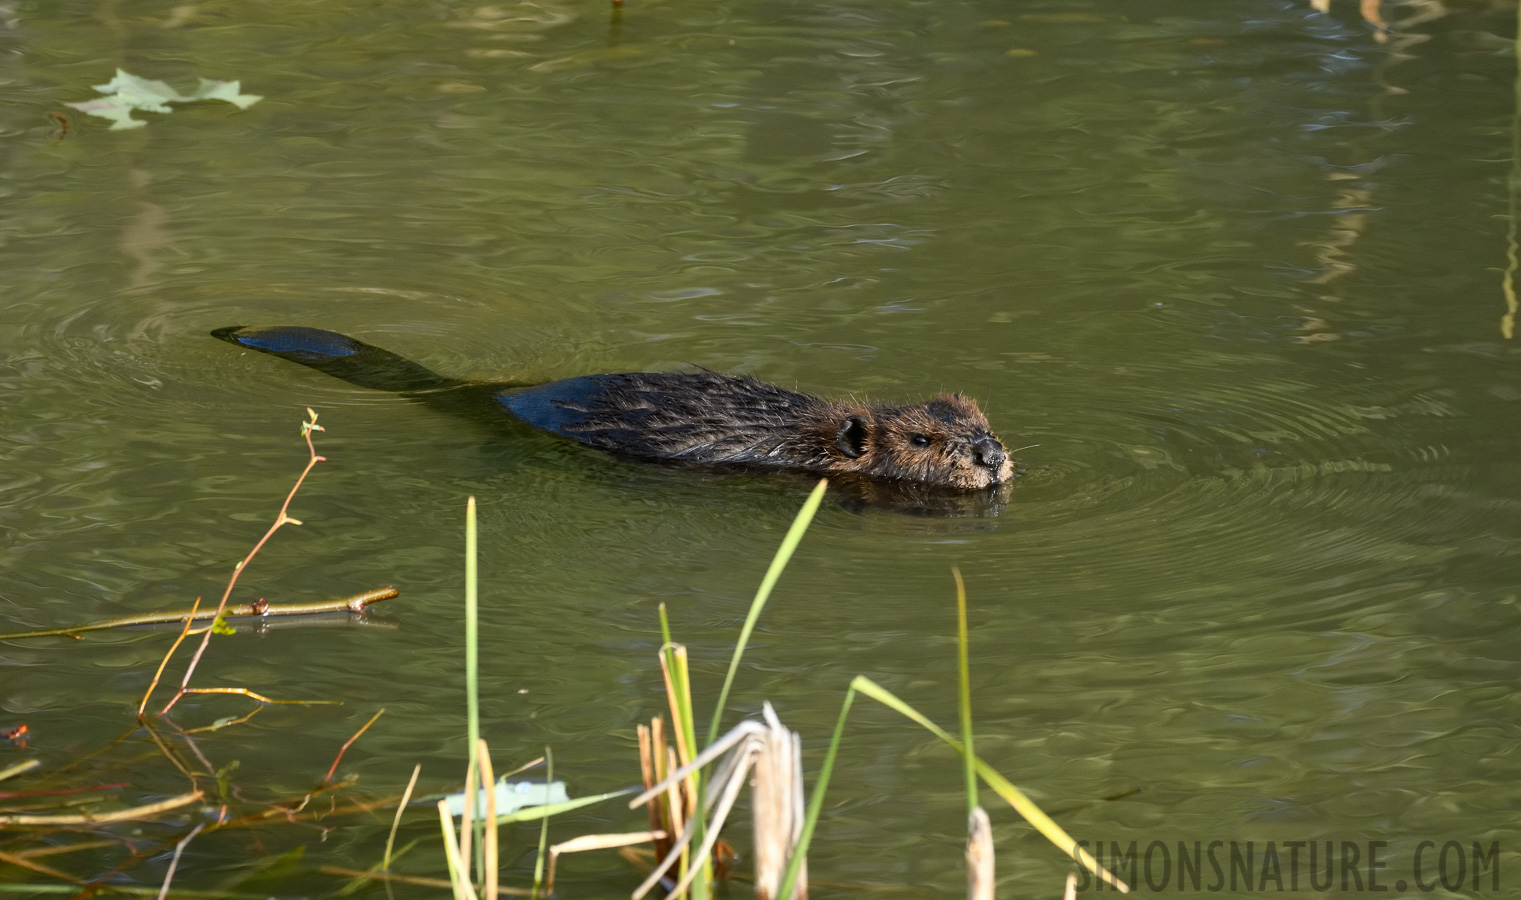 Castor canadensis [400 mm, 1/640 sec at f / 8.0, ISO 1600]